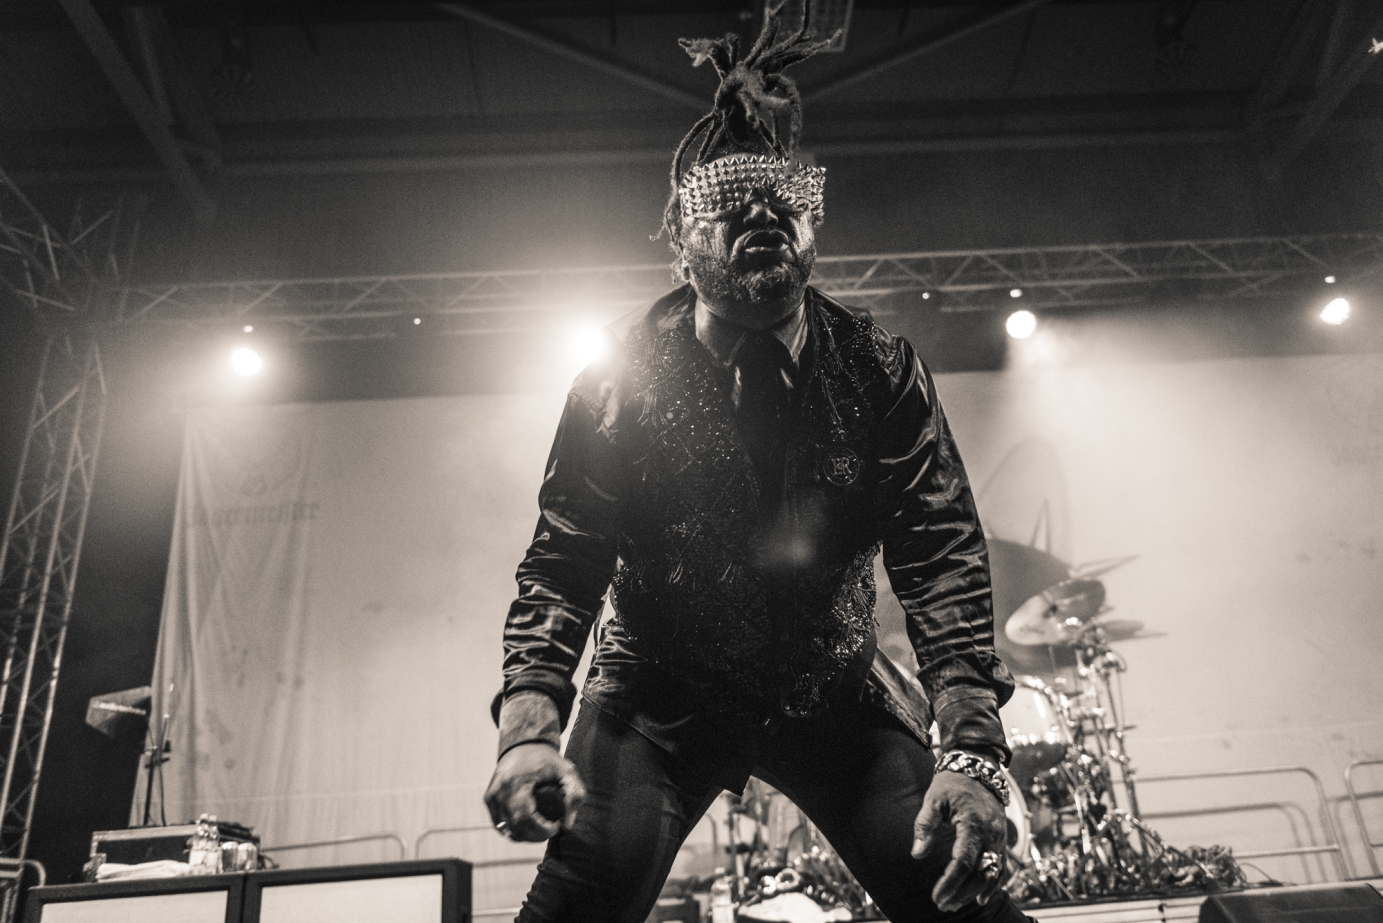 Photography for Skindred by Eleanor Jane